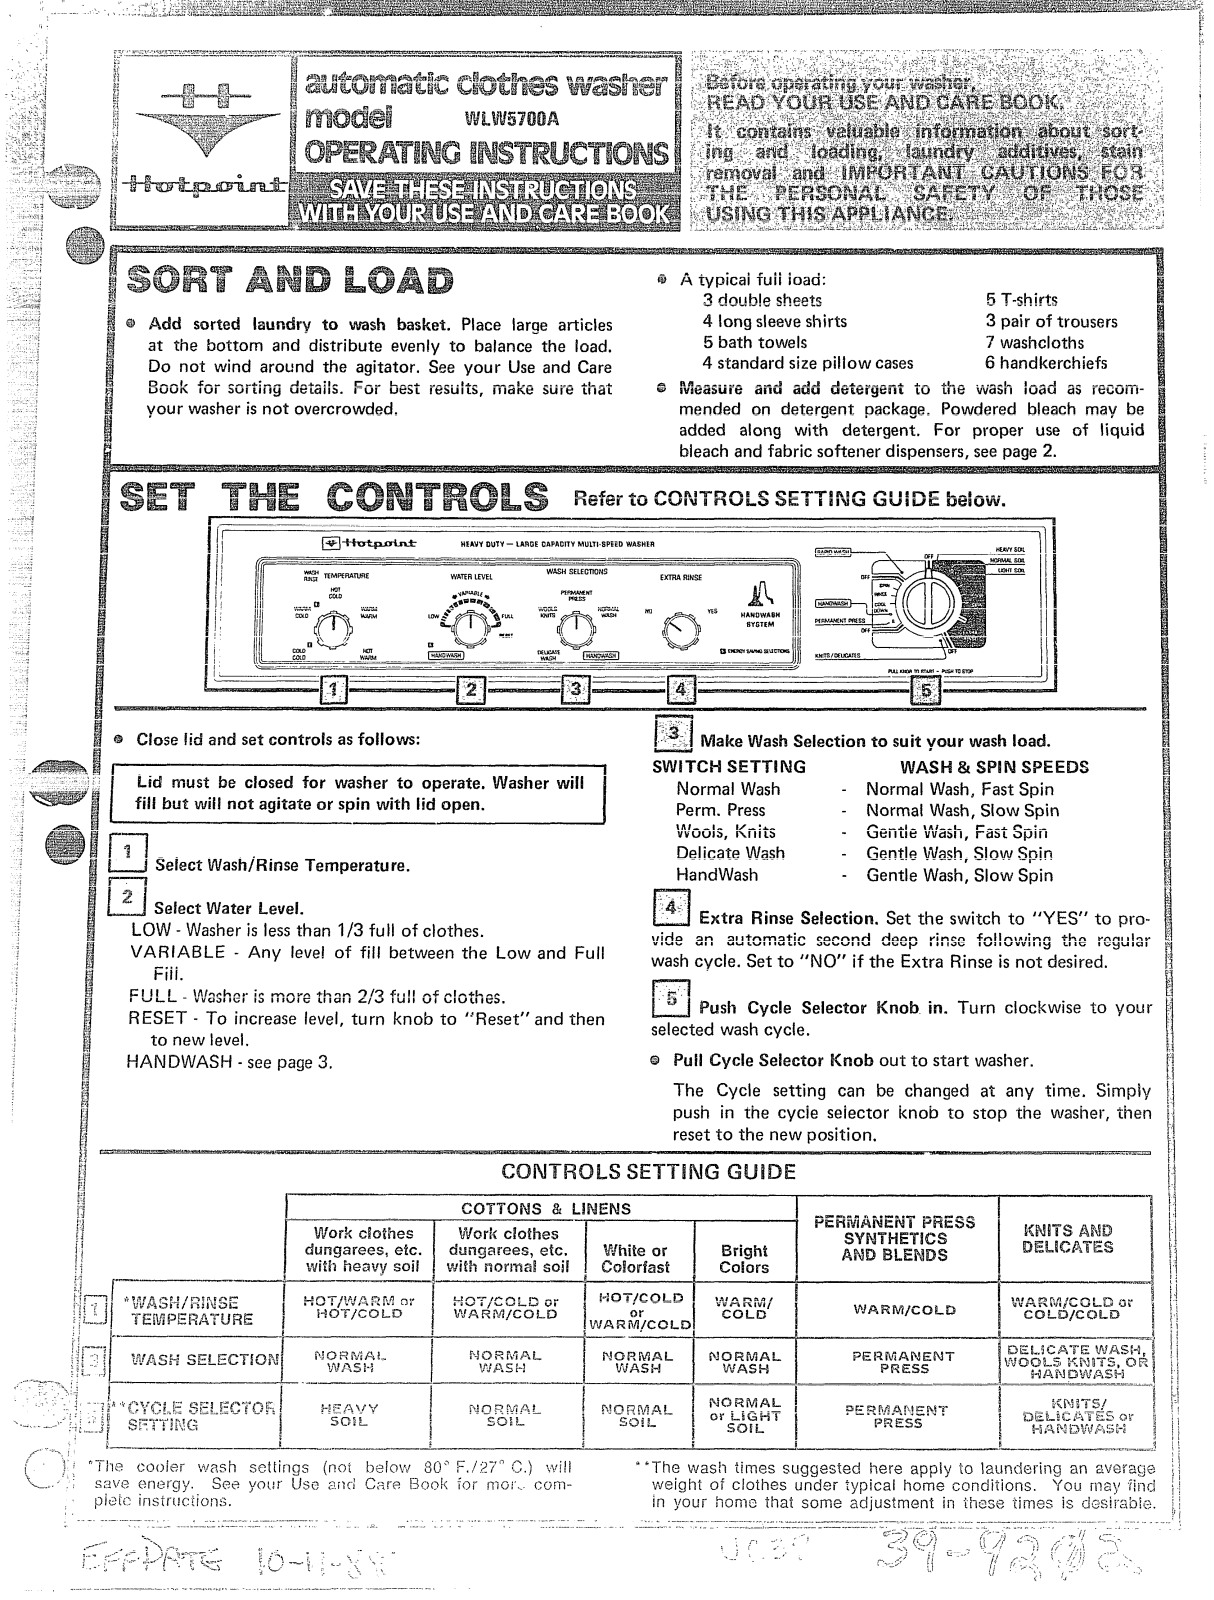 GE WLW5700A Operating Instructions